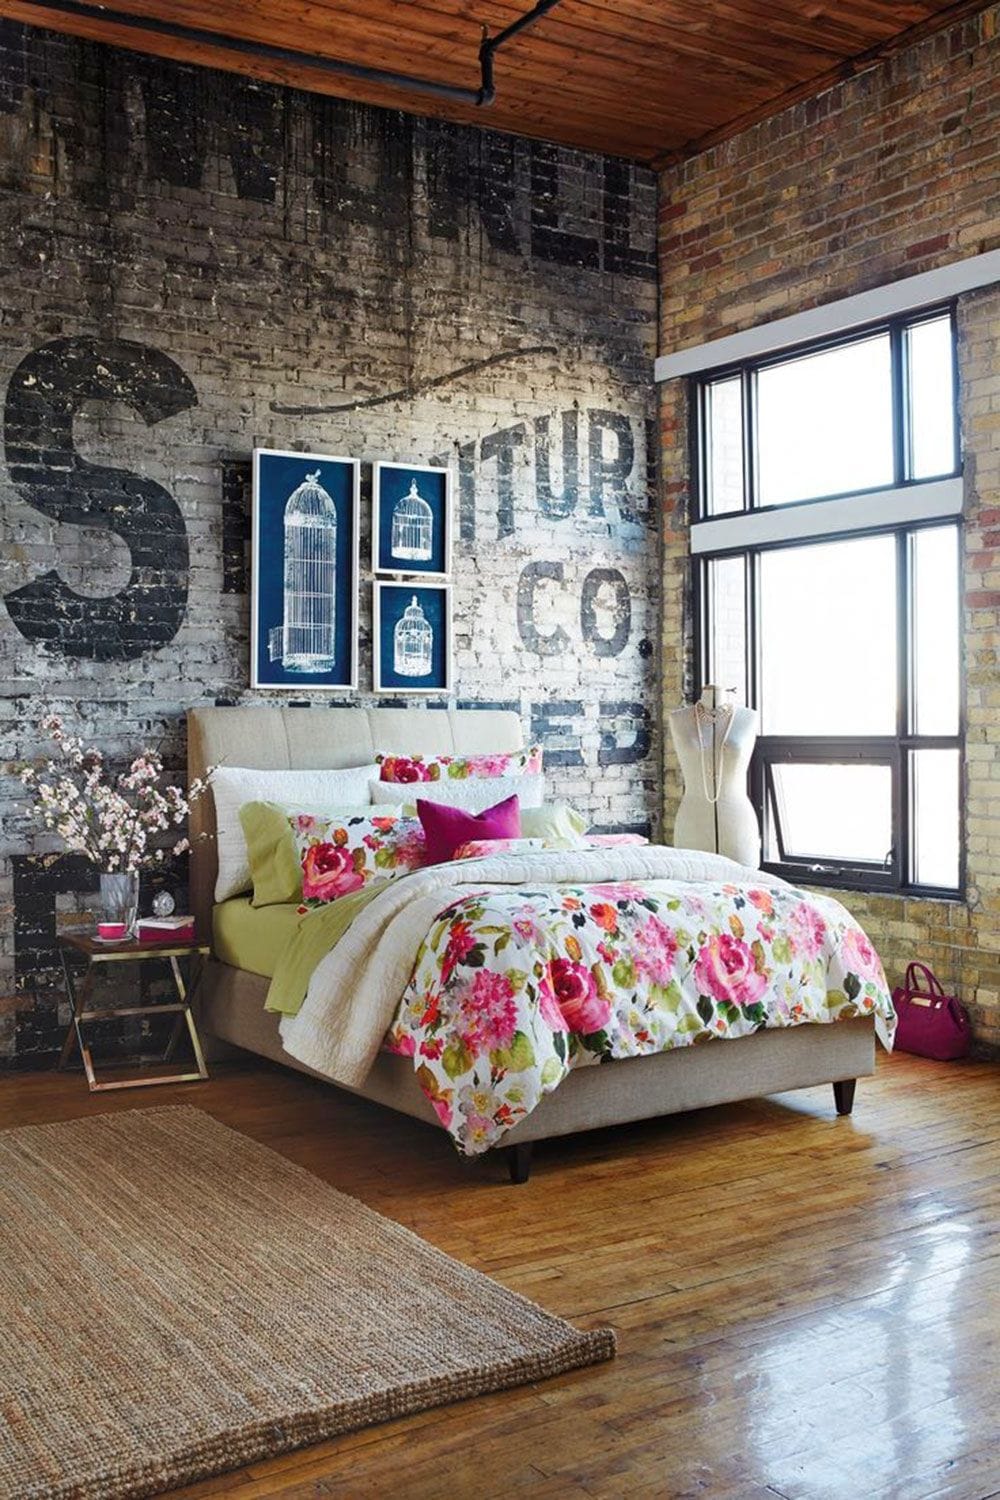 Rustic Bedroom with Brick Wall